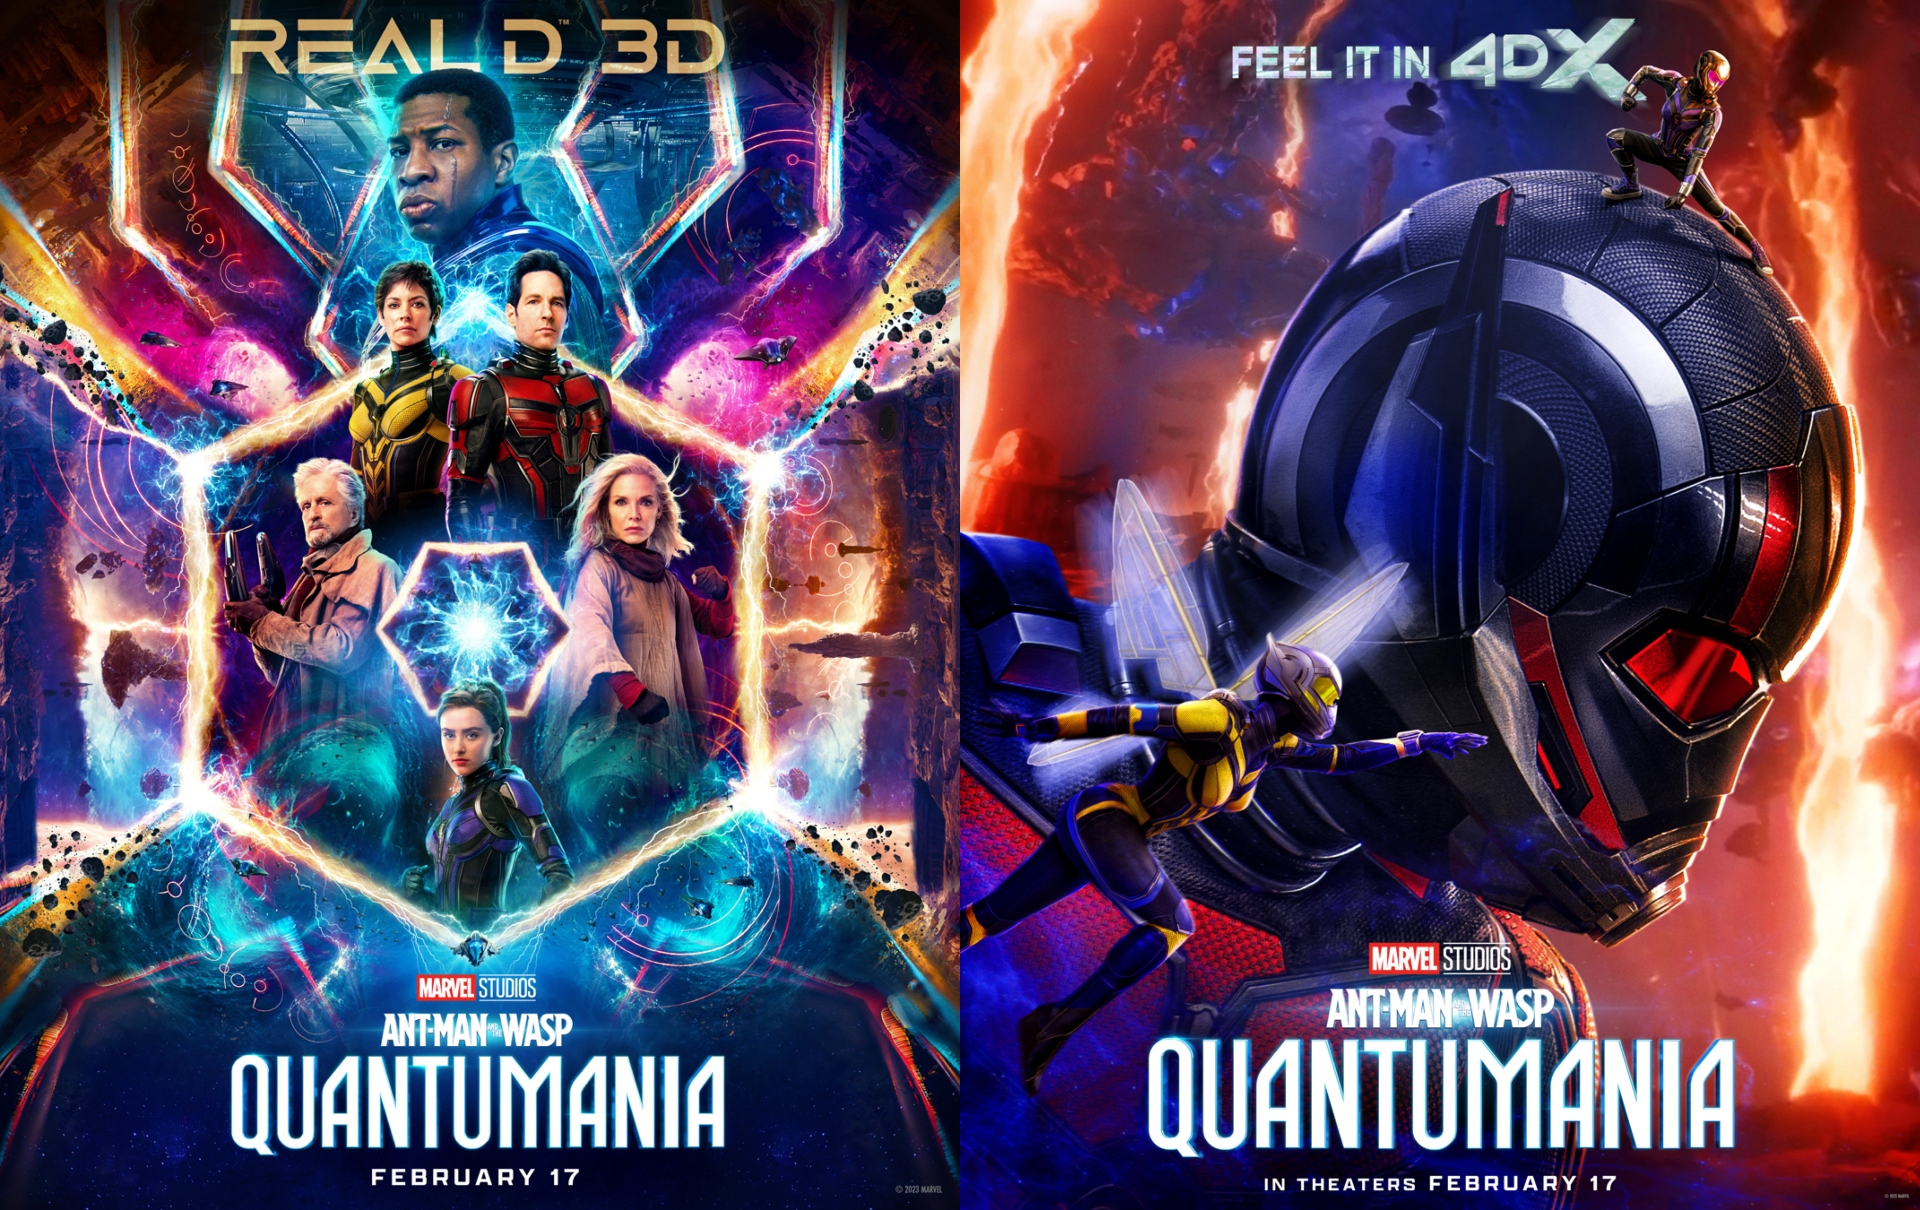 ant man quantumania nuevos posters real 3d 4dx